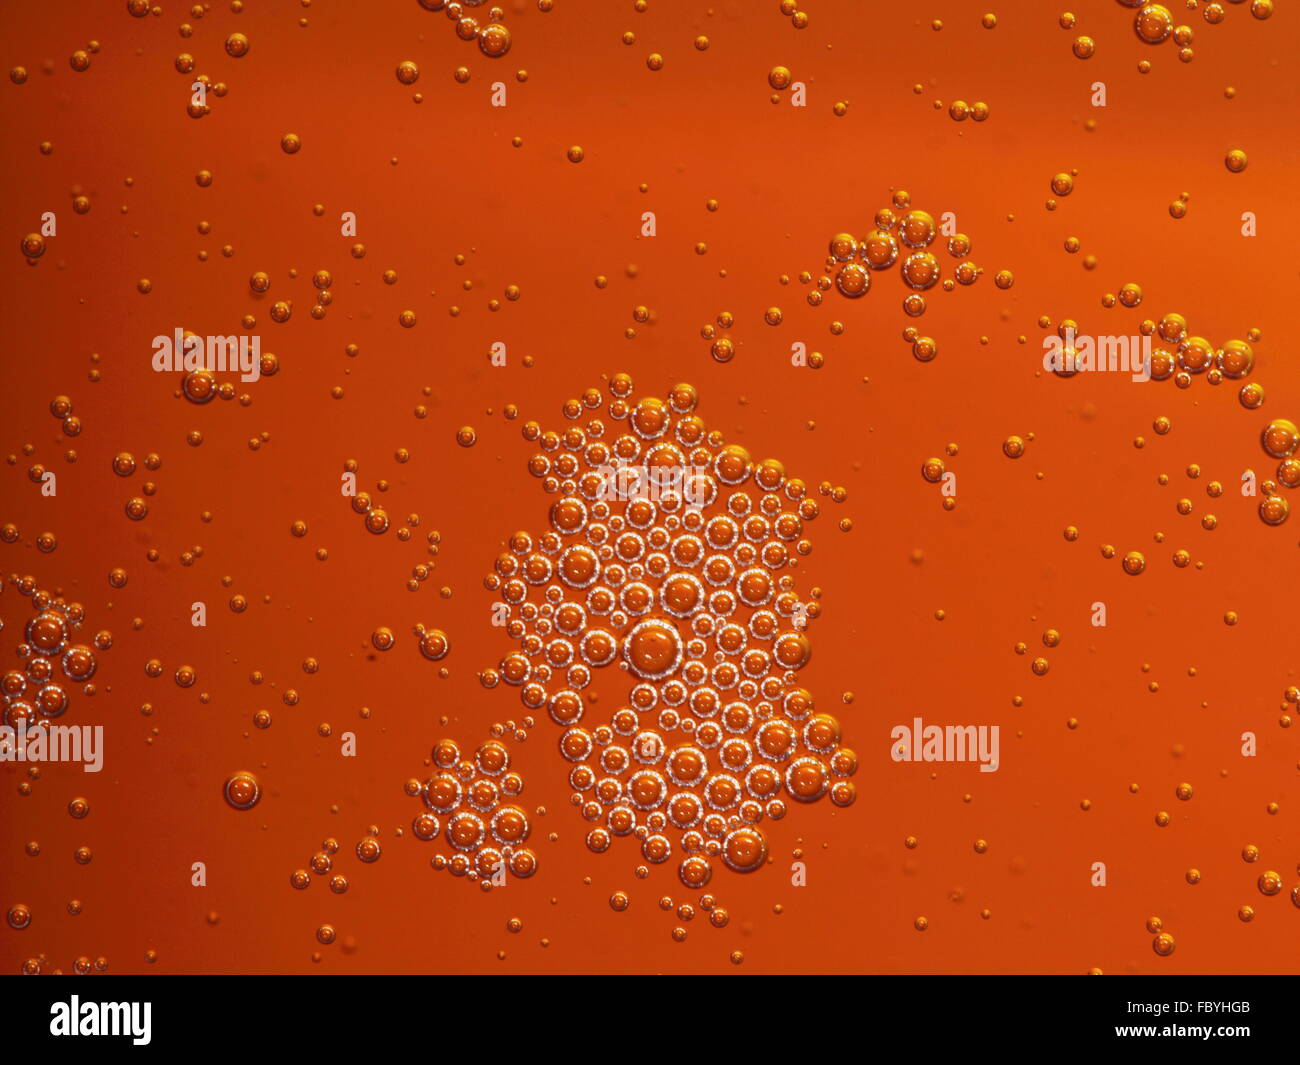 motor oil with bubbles texture background Stock Photo